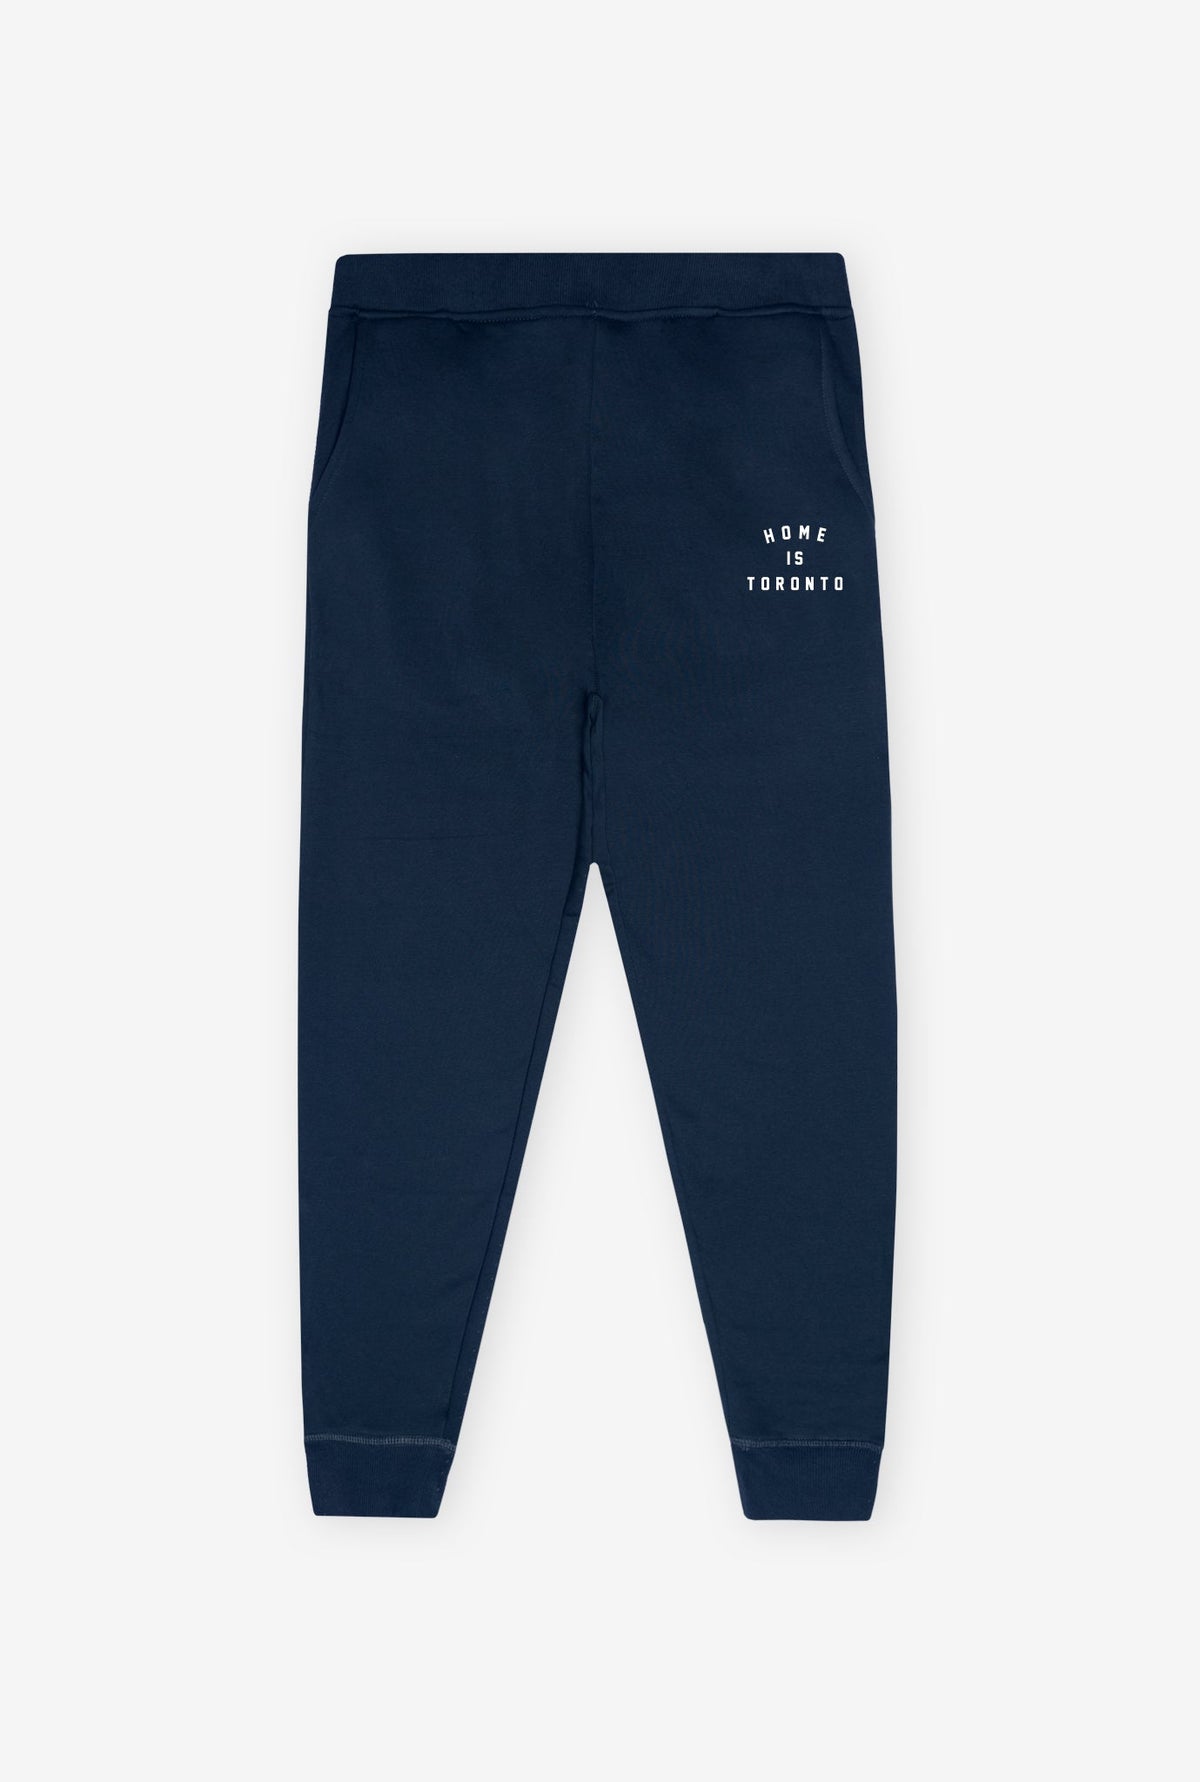 Home is Toronto Jogger - Navy